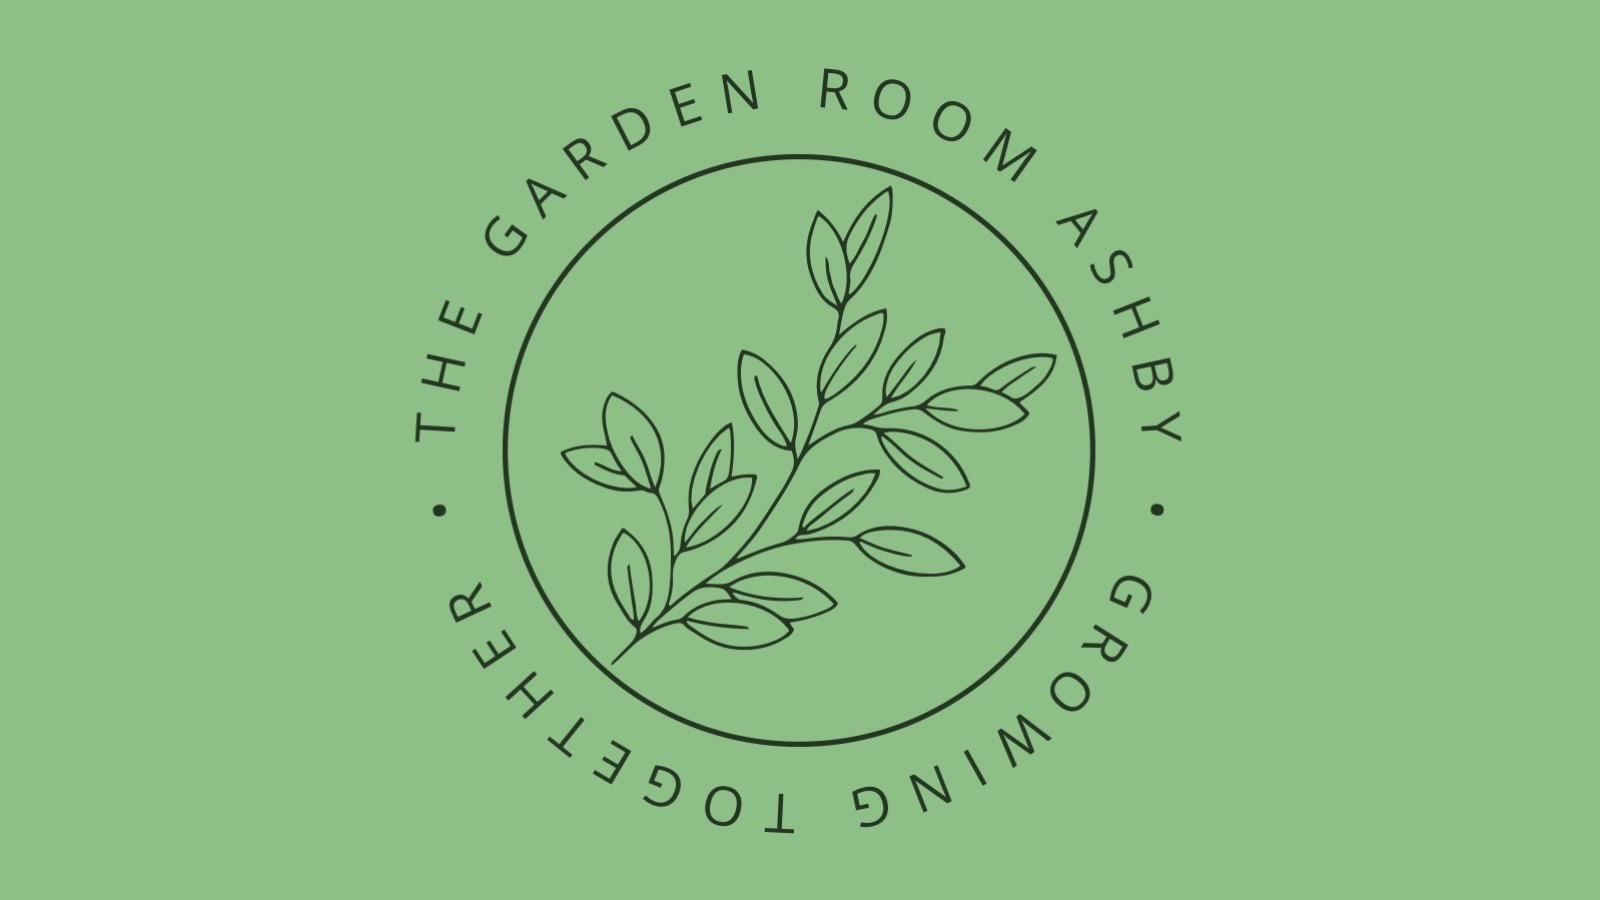 The Logo for The Garden Room Ashby - Growing Together 